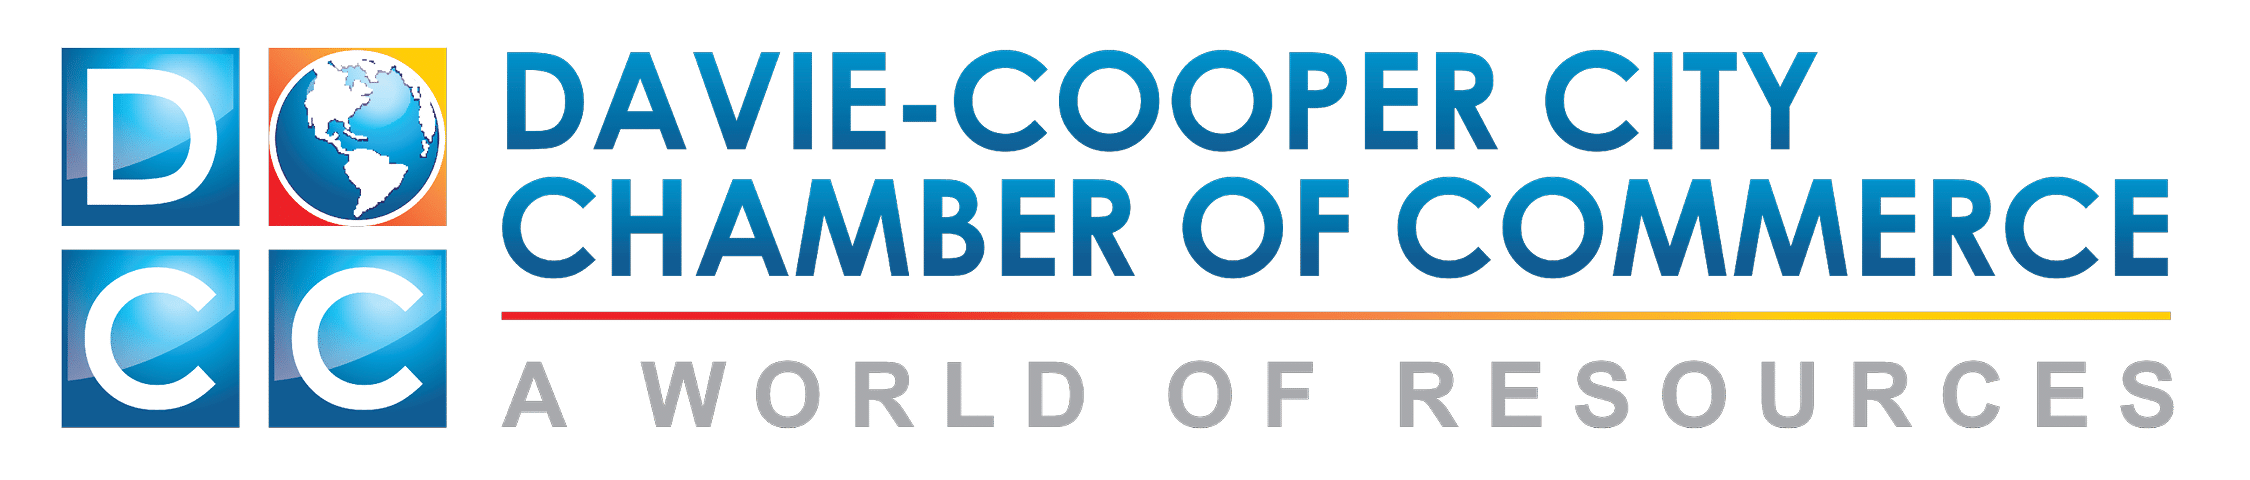 Dave Cooper City Chamber of Commerce logo